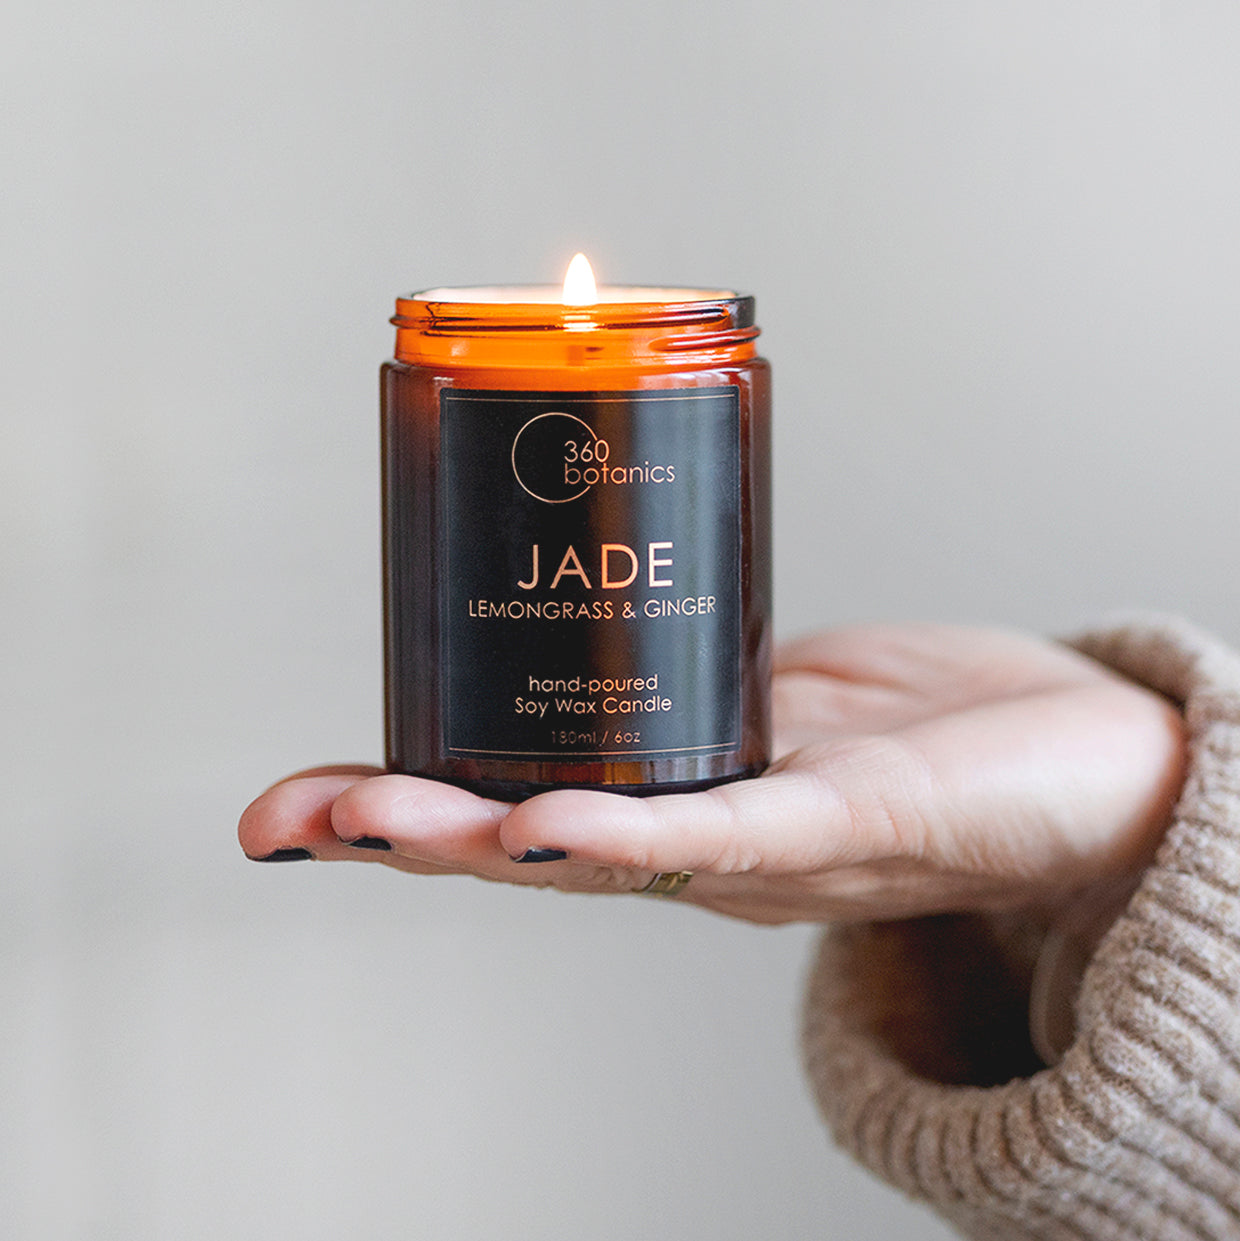 Jade candle in amber jar glowing held out on woman's handA person holds a lit soy wax candle by "360 botanics" named JADE with lemongrass and ginger scent. The candle is in a small amber glass jar with a label detailing the brand and scent, and the warm glow of the flame is visible at the top. The person is wearing a beige sweater, and only their hand is in the frame against a neutral background, highlighting the candle.